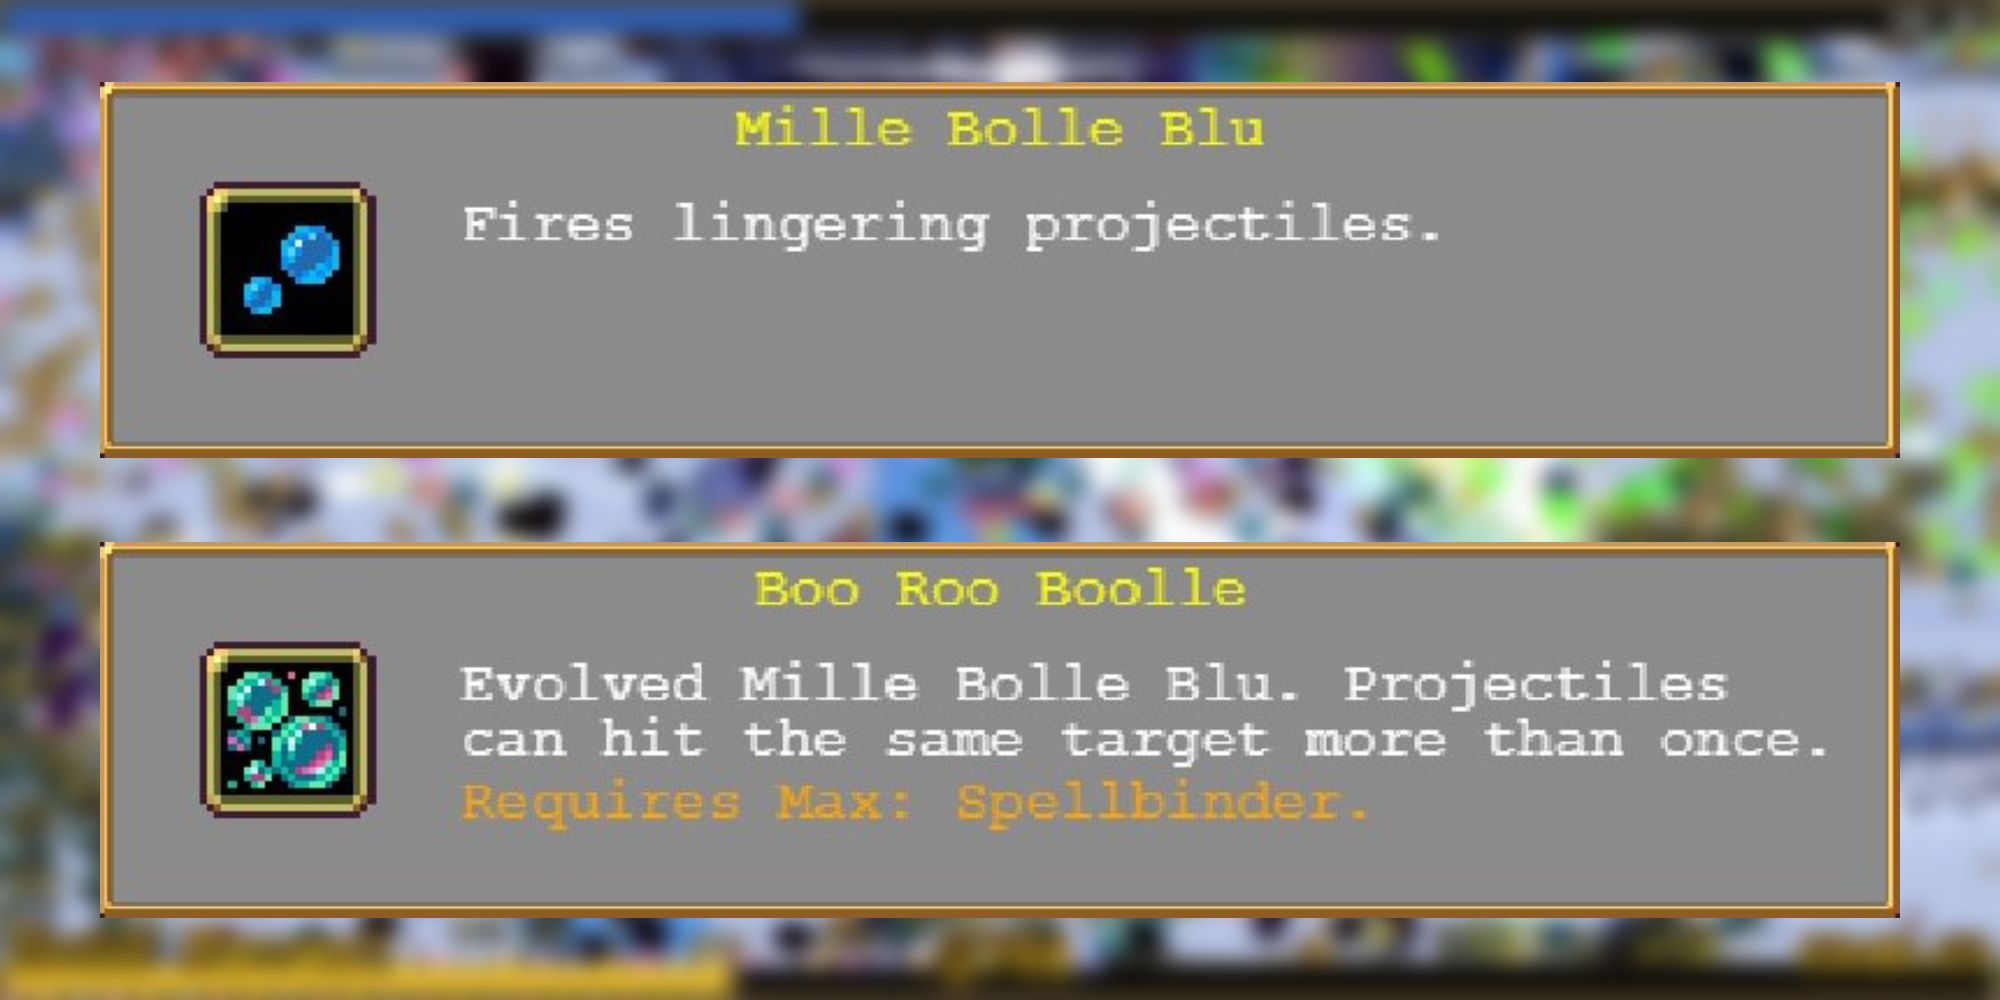 Information on the Mille Bolle Blu and Boo Roo Boollee weapons in Vampire Survivors.